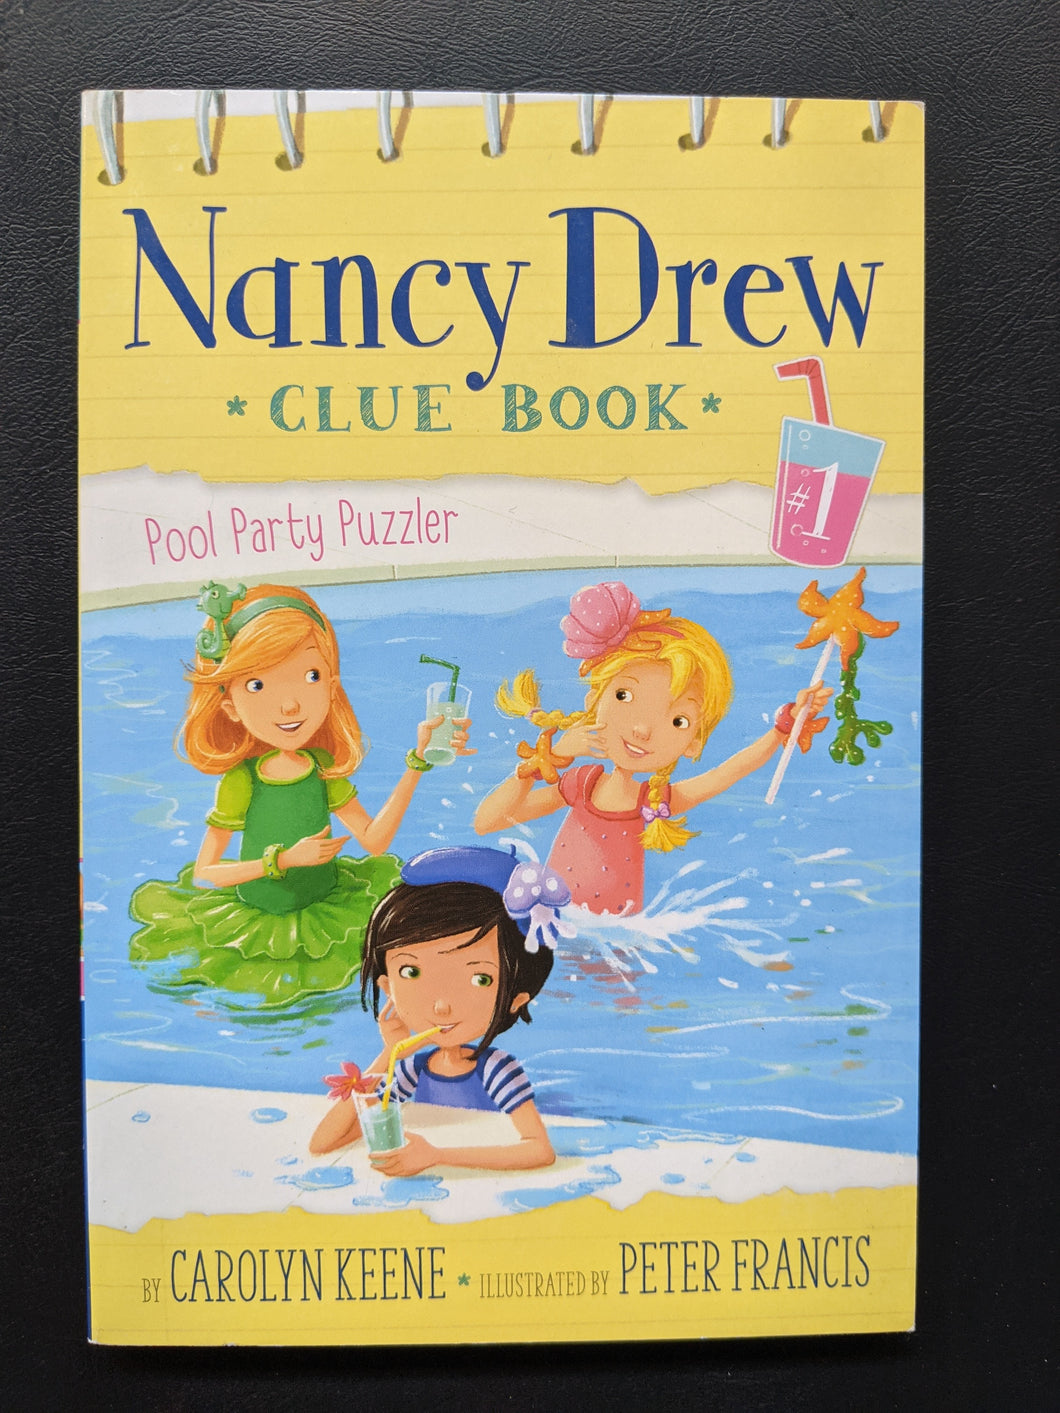 Nancy Drew- Pool Party Puzzler (Clue Book #1)